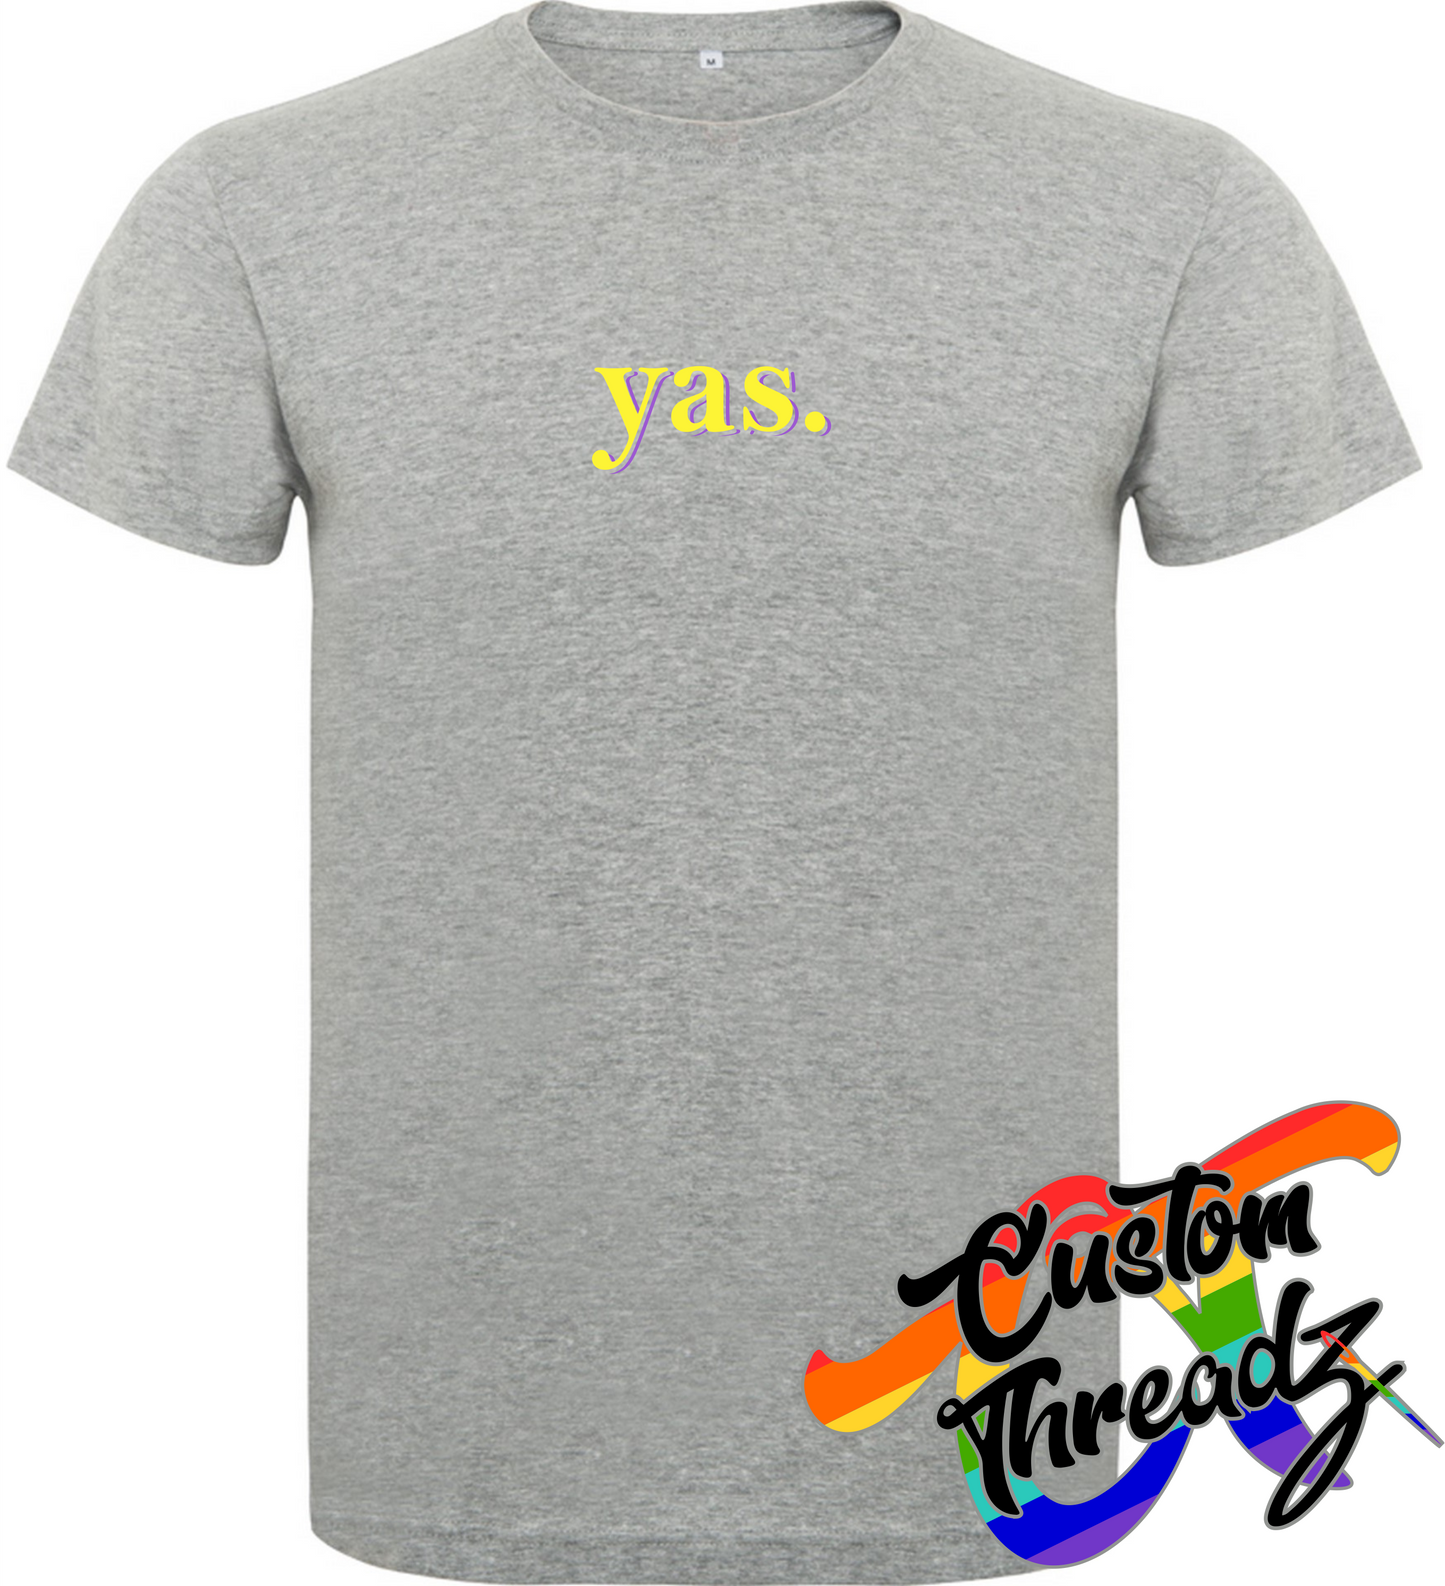 athletic heather grey tee with yas DTG printed design